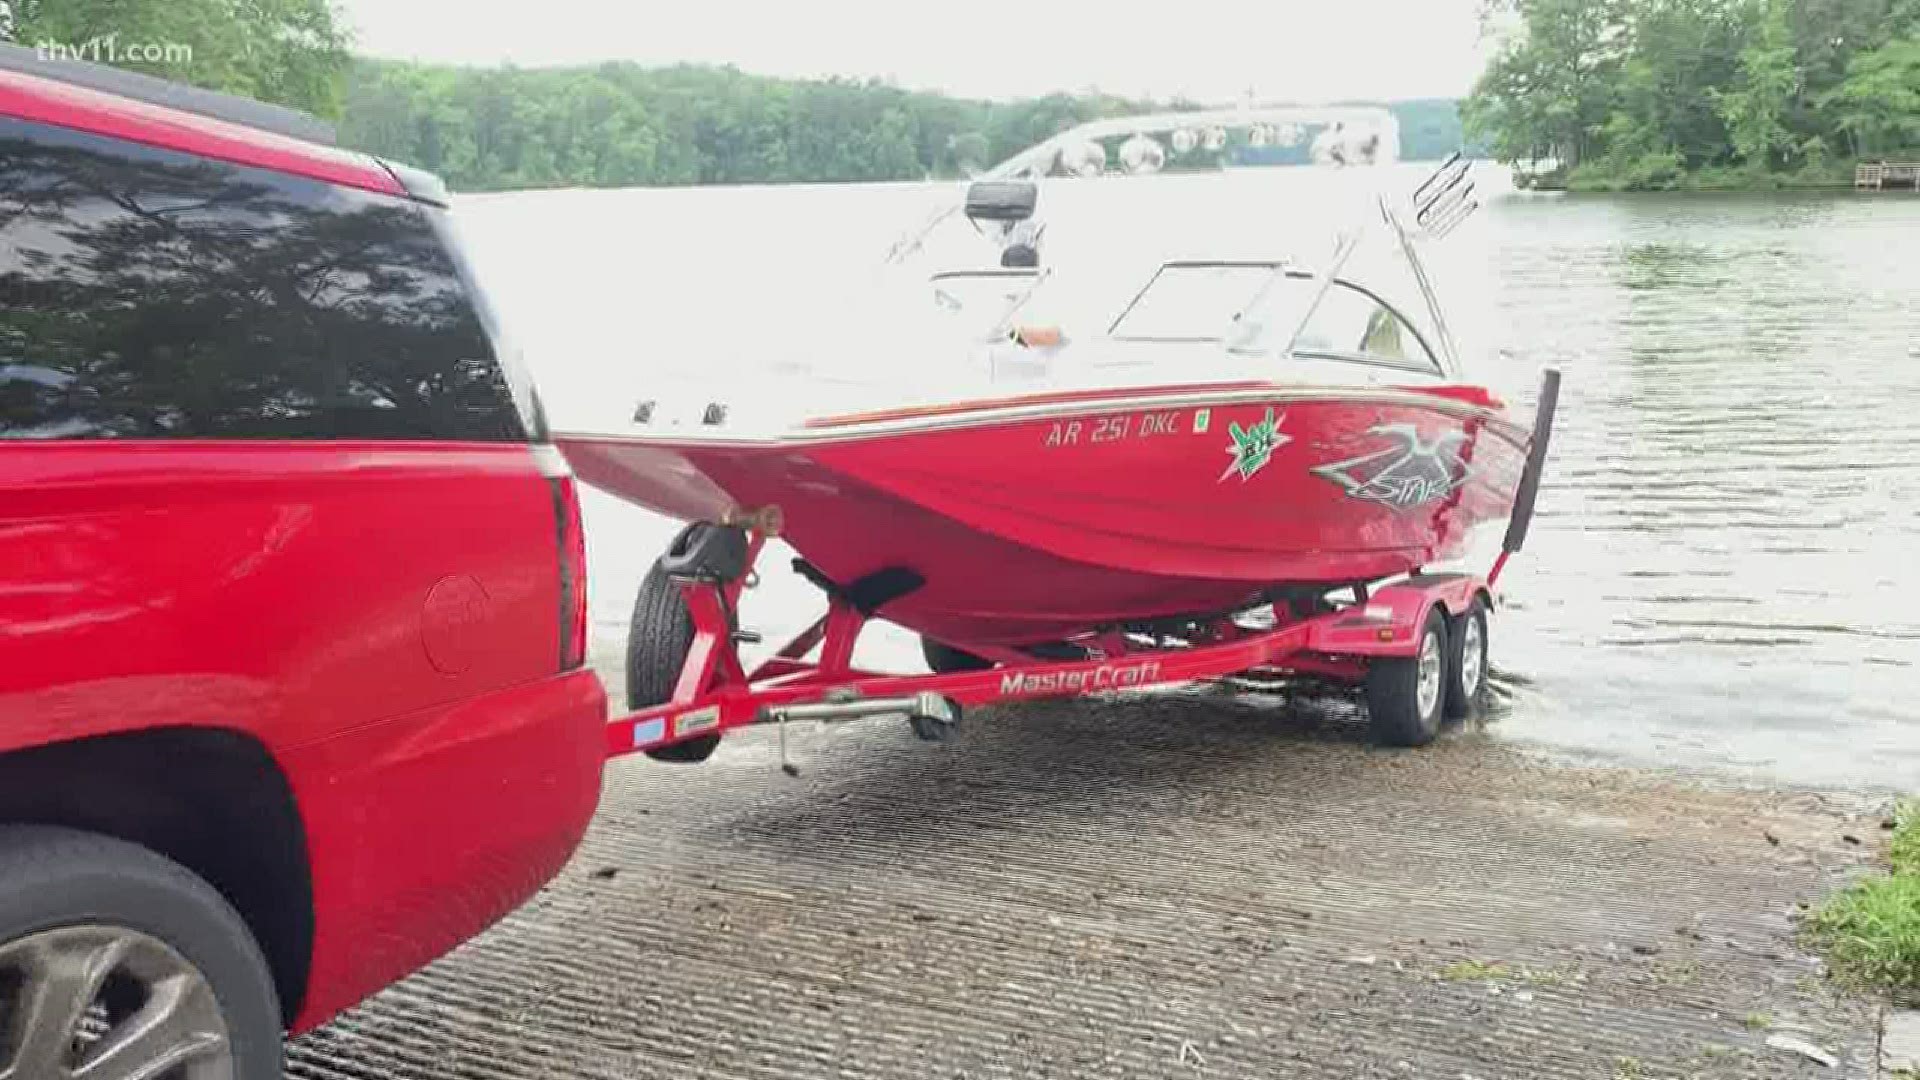 Crowds of boaters made their way to Arkansas lakes this weekend, which caused concern for some people.